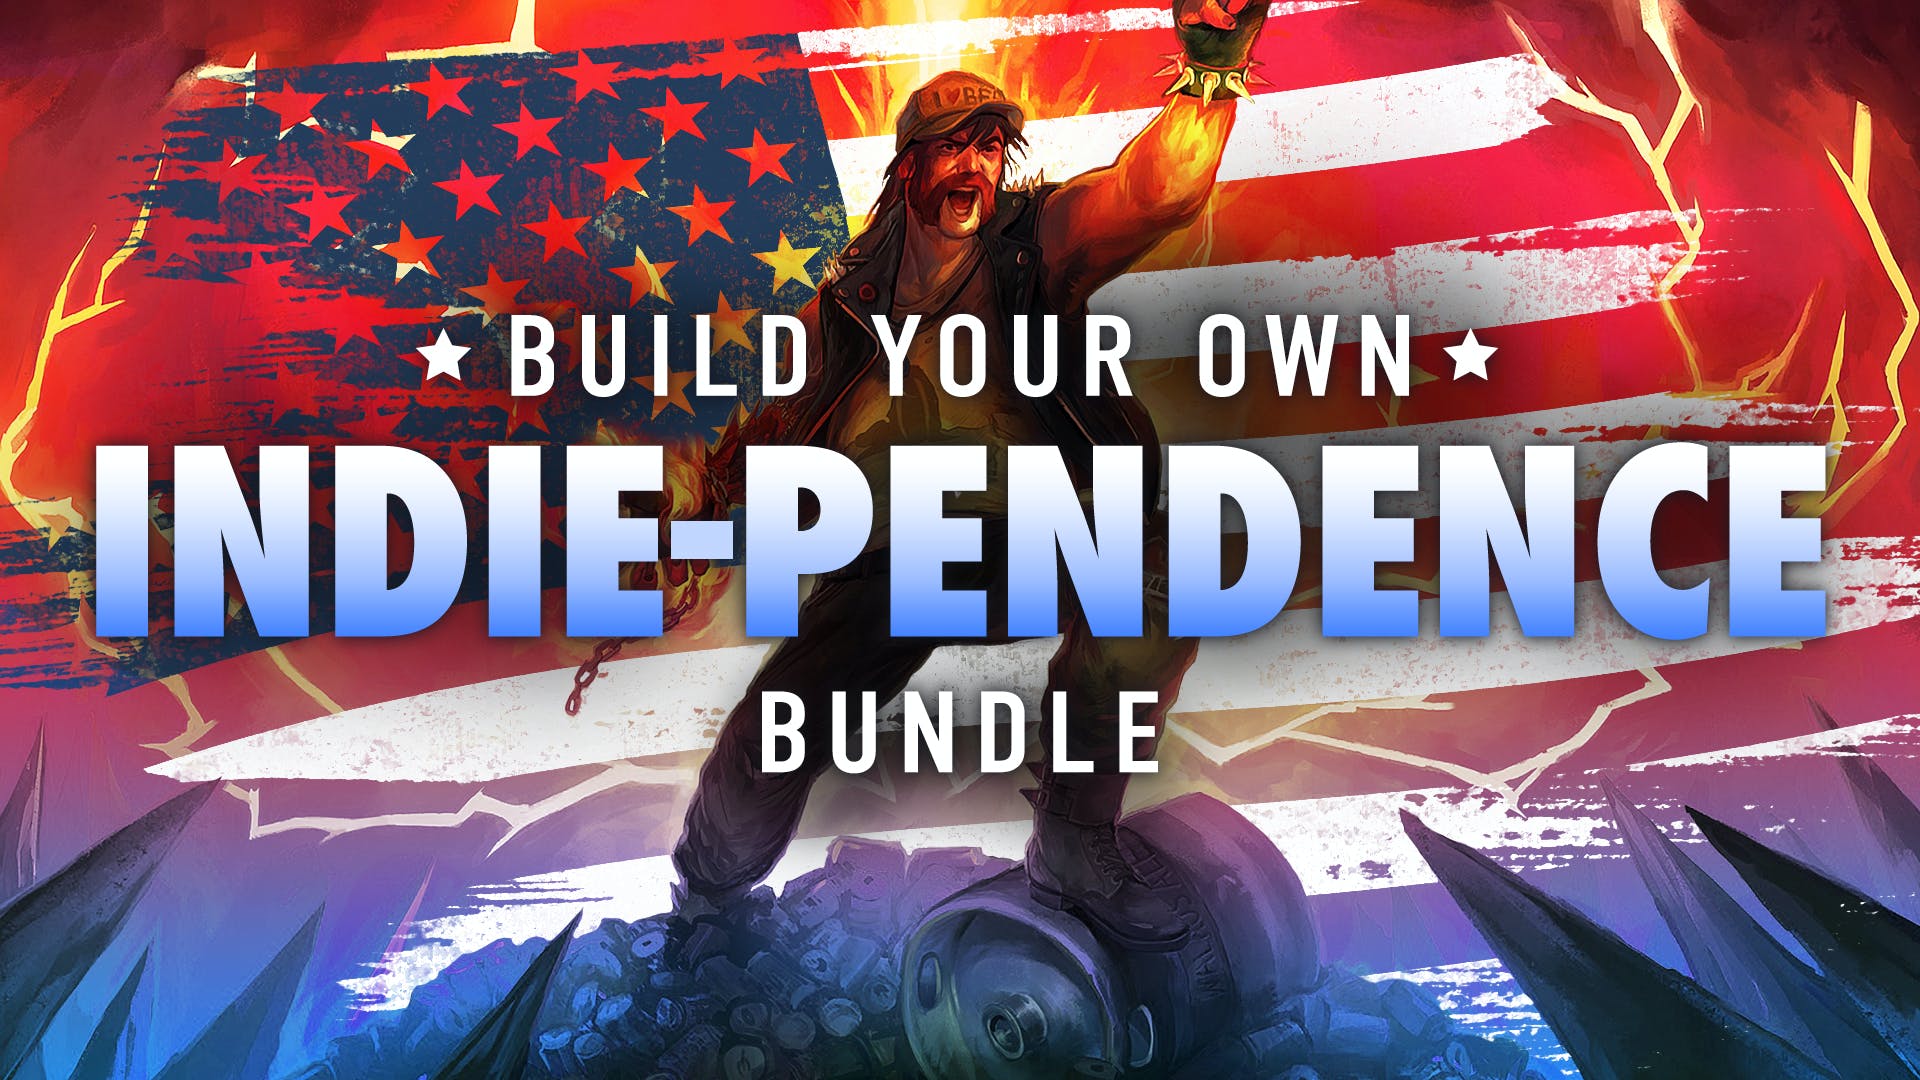 Fanatical: Build Your Own Indie-Pendence Bundle (PC Digital): 10 for $4.99, 5 for $2.99, 1 for $1 (Syberia Triple Pack $1 & more)